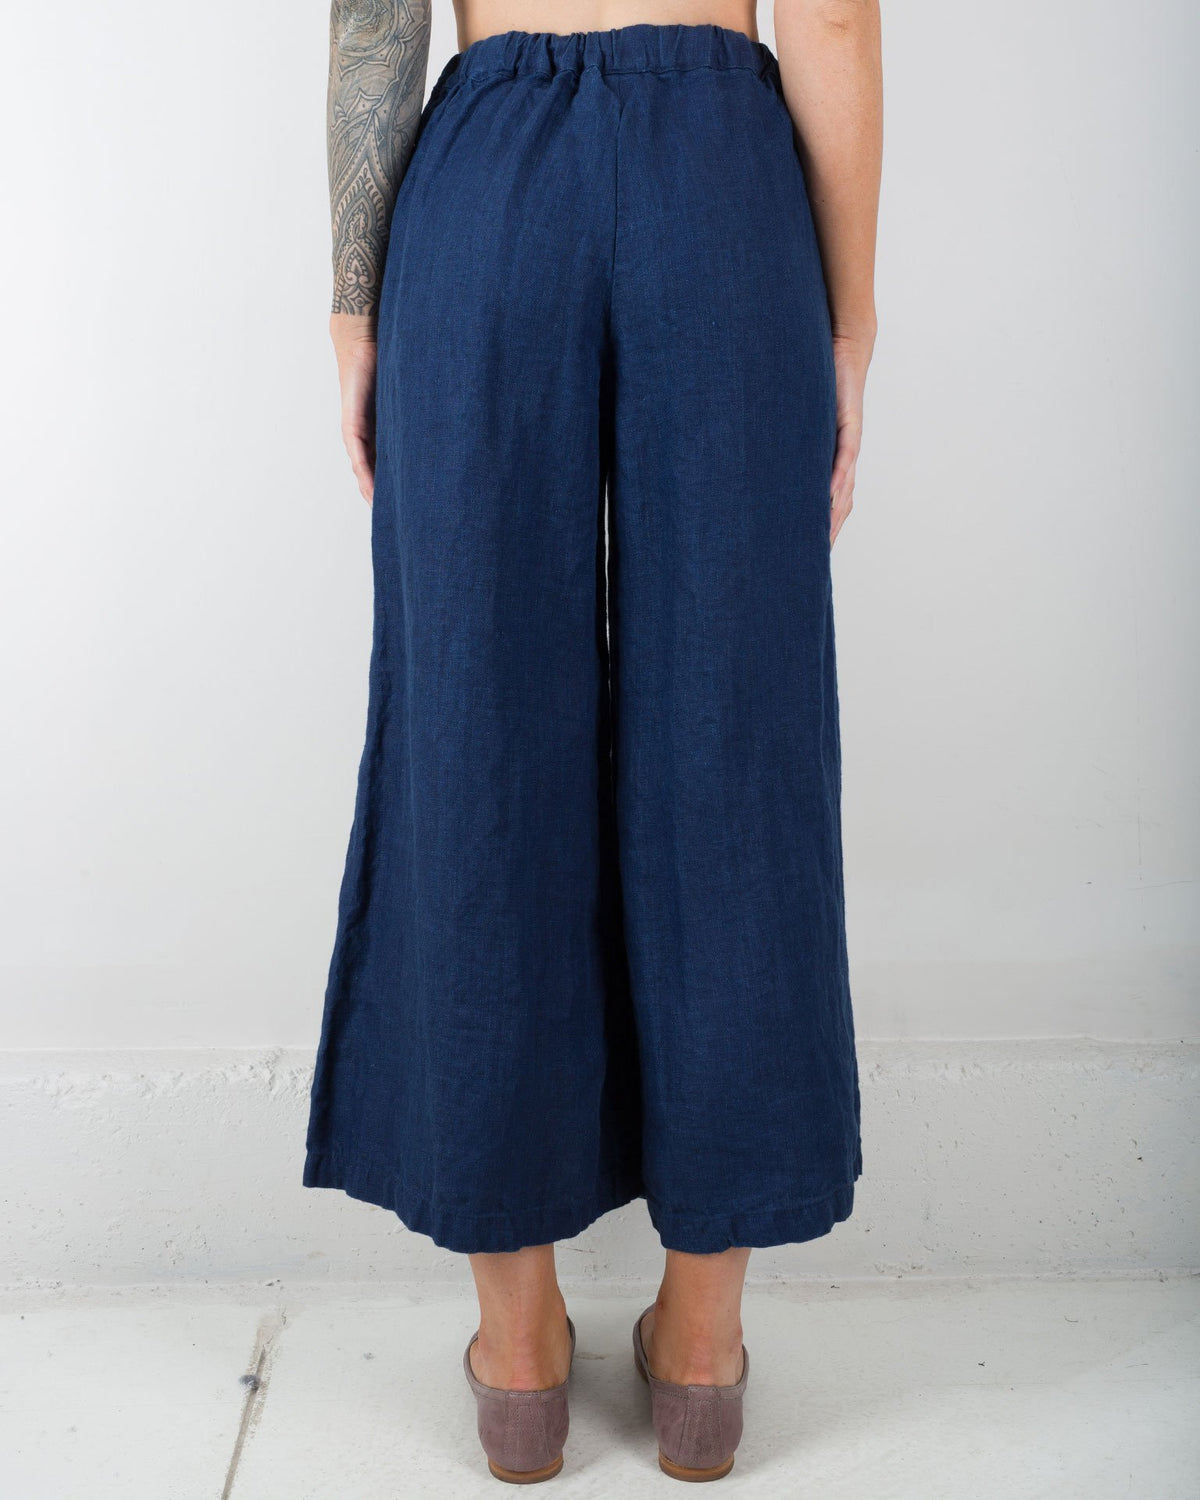 CP Shades Cropped Wendy Pant in Indigo